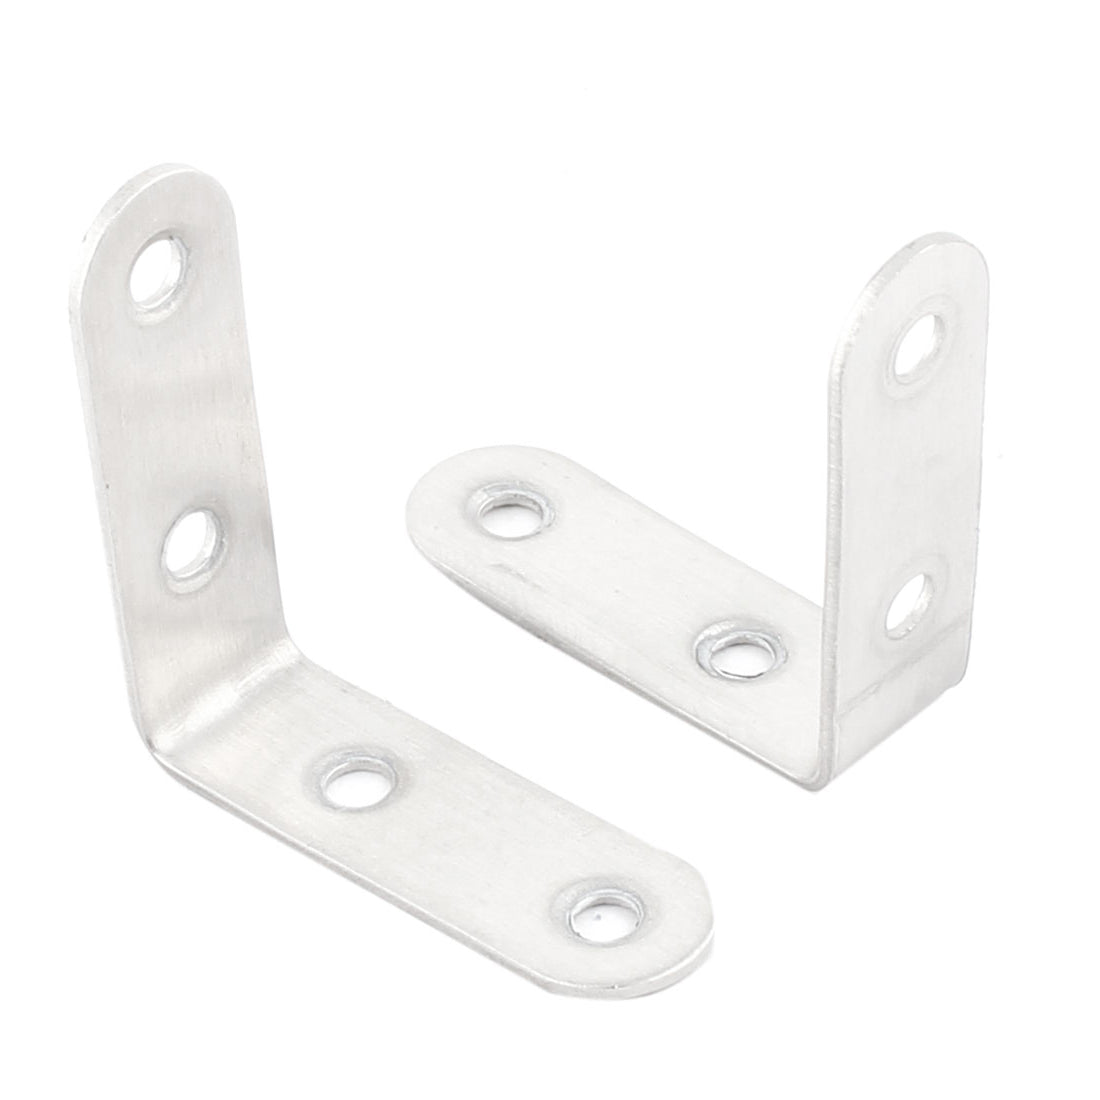 uxcell Uxcell Home Stainless Steel L Shape Furniture Accessory Corner Brace Joint Right Angle Bracket 2pcs